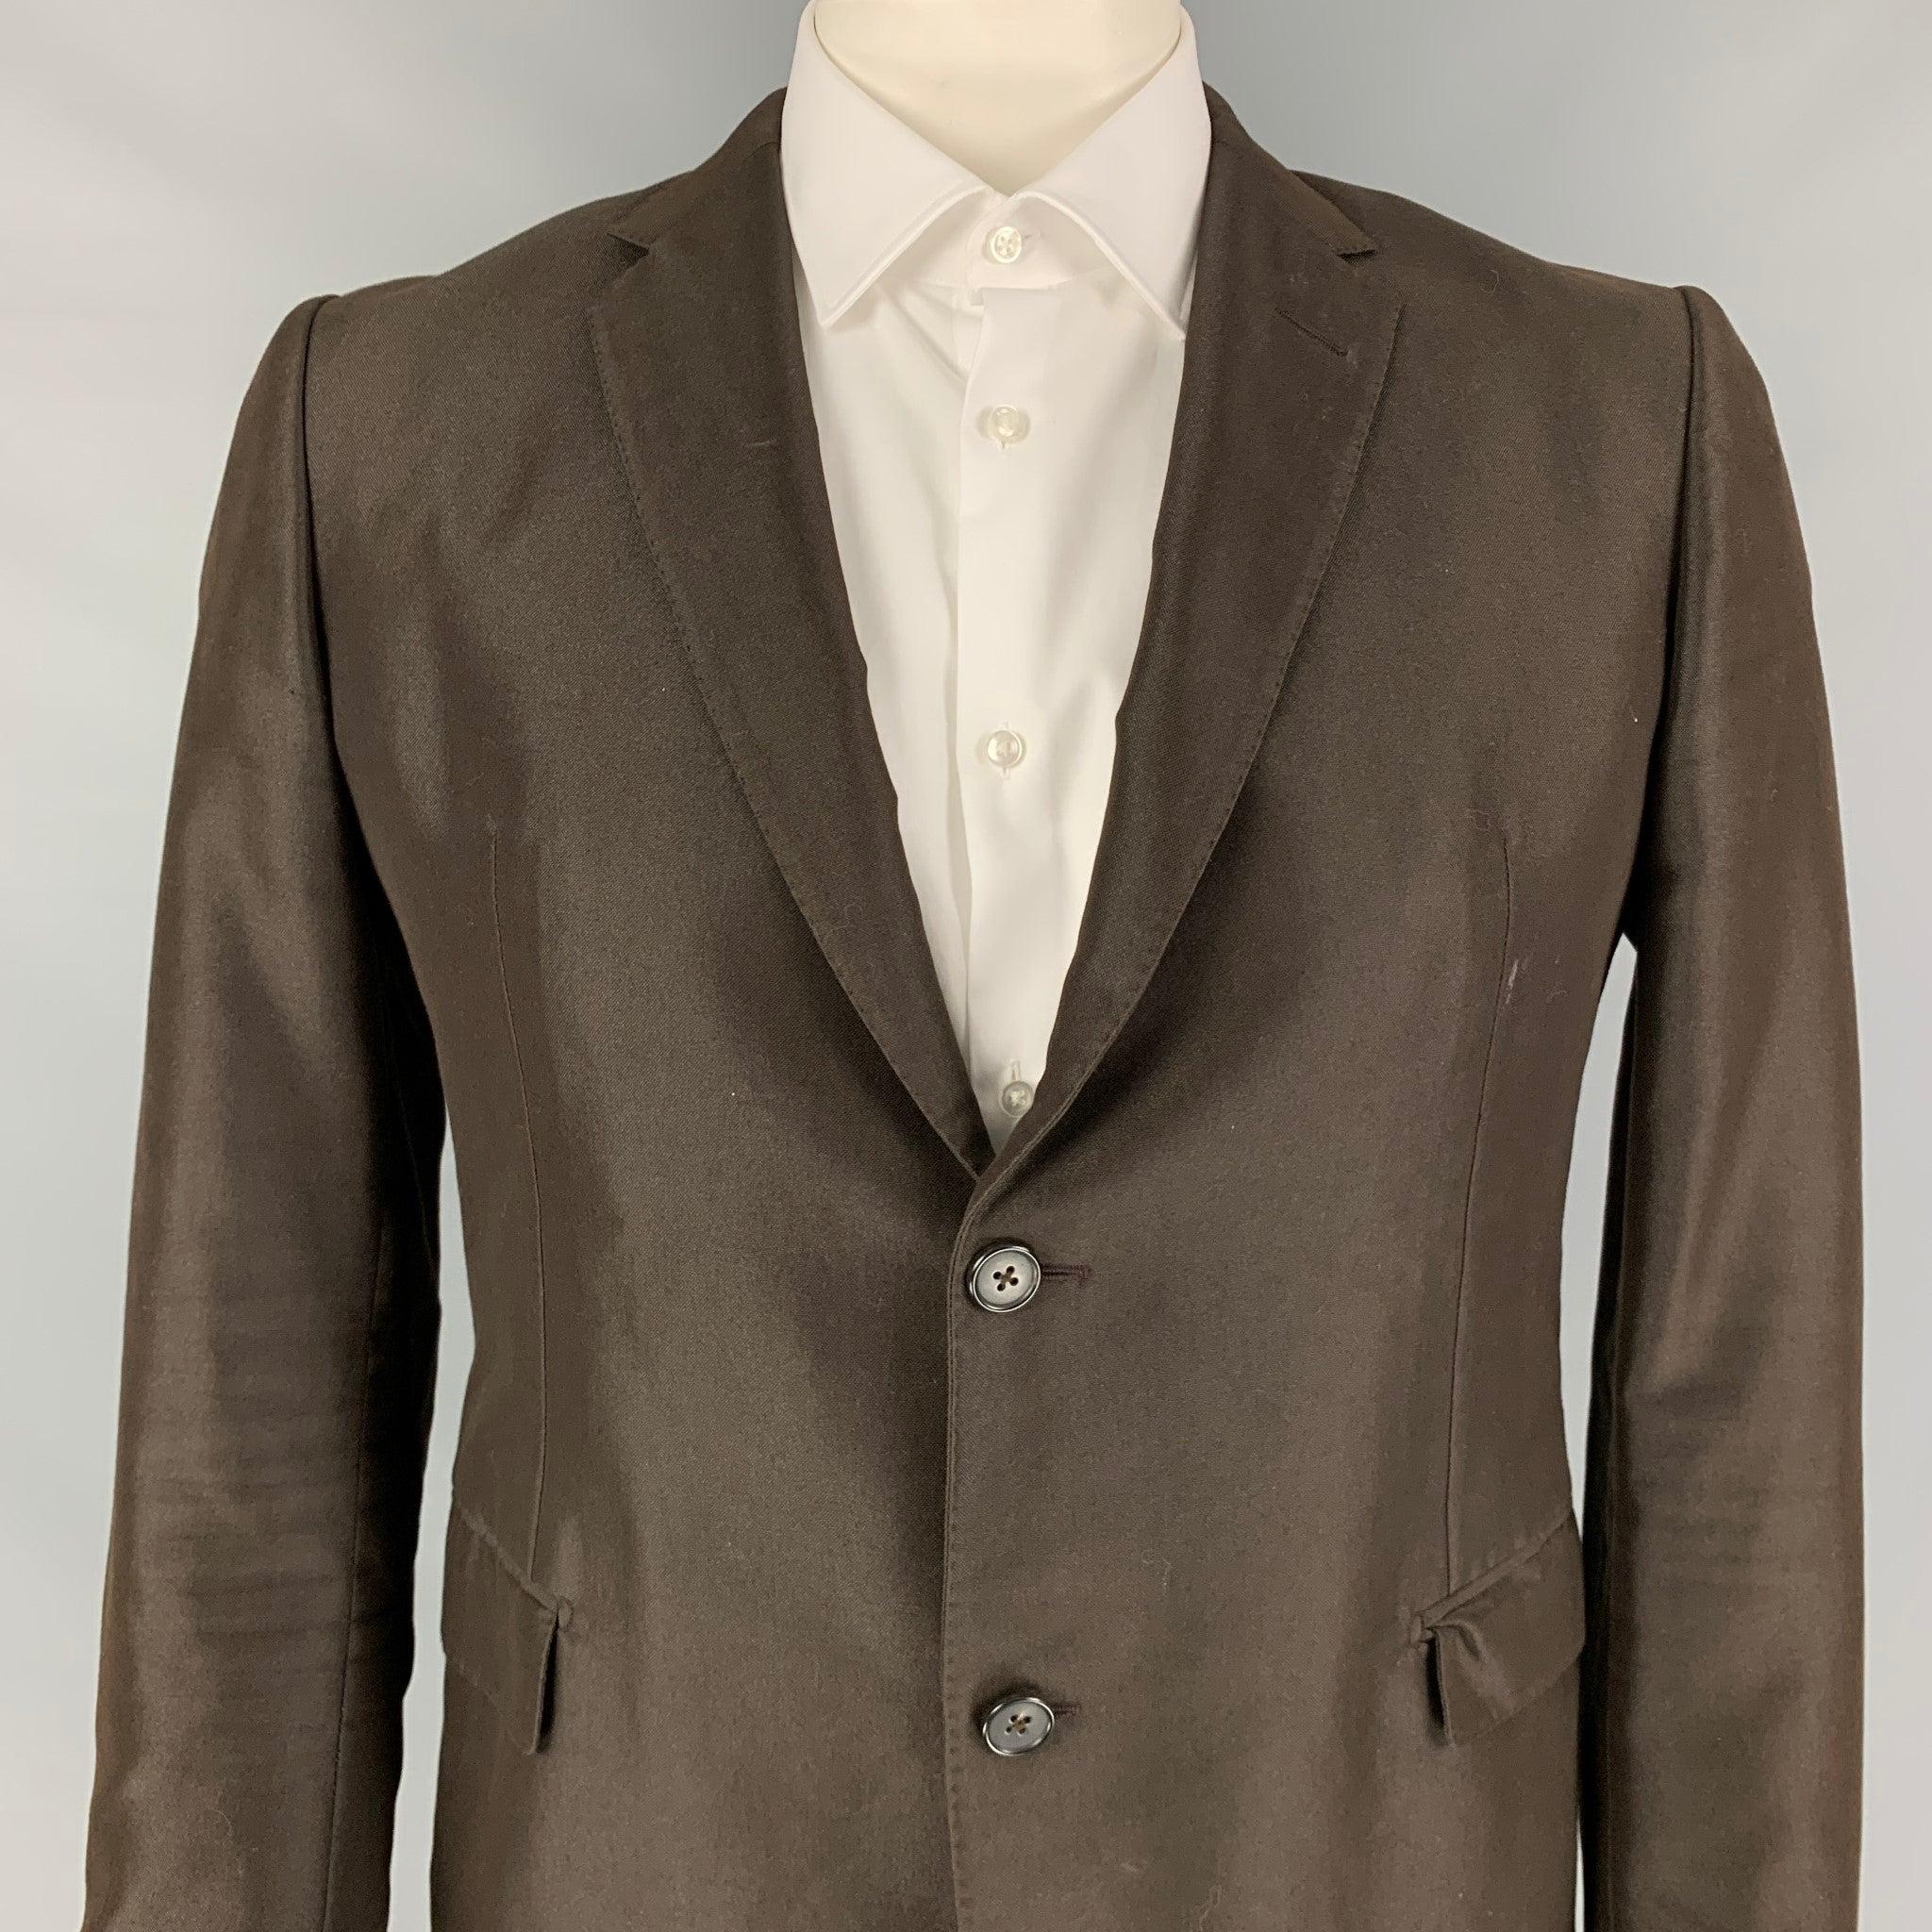 MARNI sport coat comes in a brown cotton / polyester with a full liner featuring a notch lapel, flap pockets, single back vent, and a double button closure. Made in Italy.
Very Good
Pre-Owned Condition. 

Marked:   52 

Measurements: 
 
Shoulder:
18